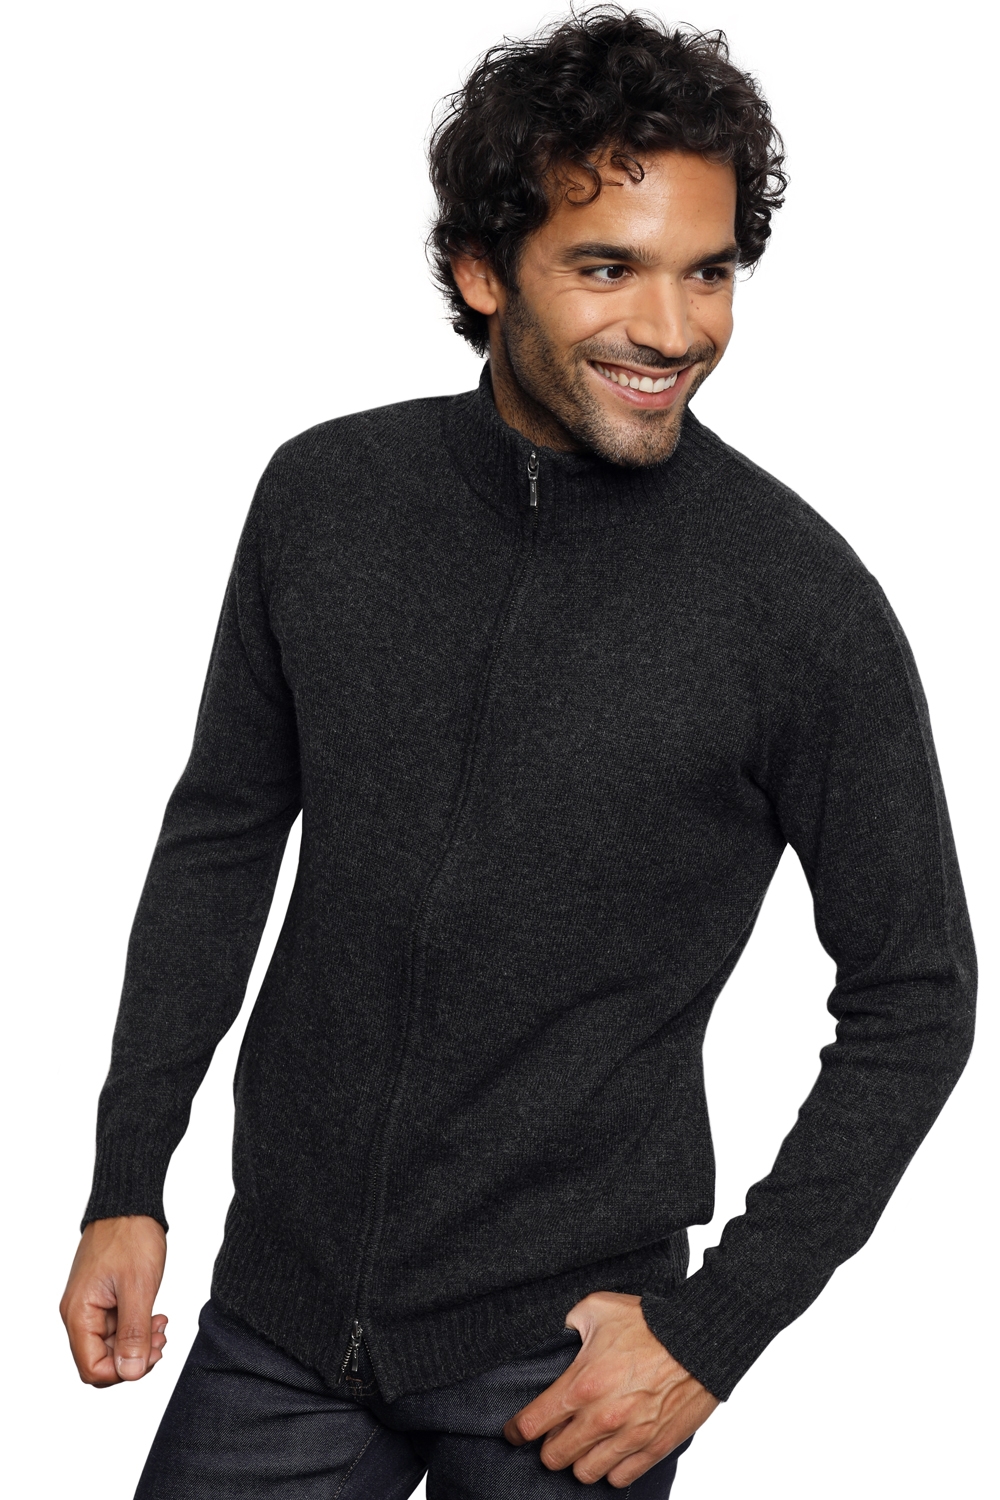 Chameau pull homme zip capuche clyde anthracite xl